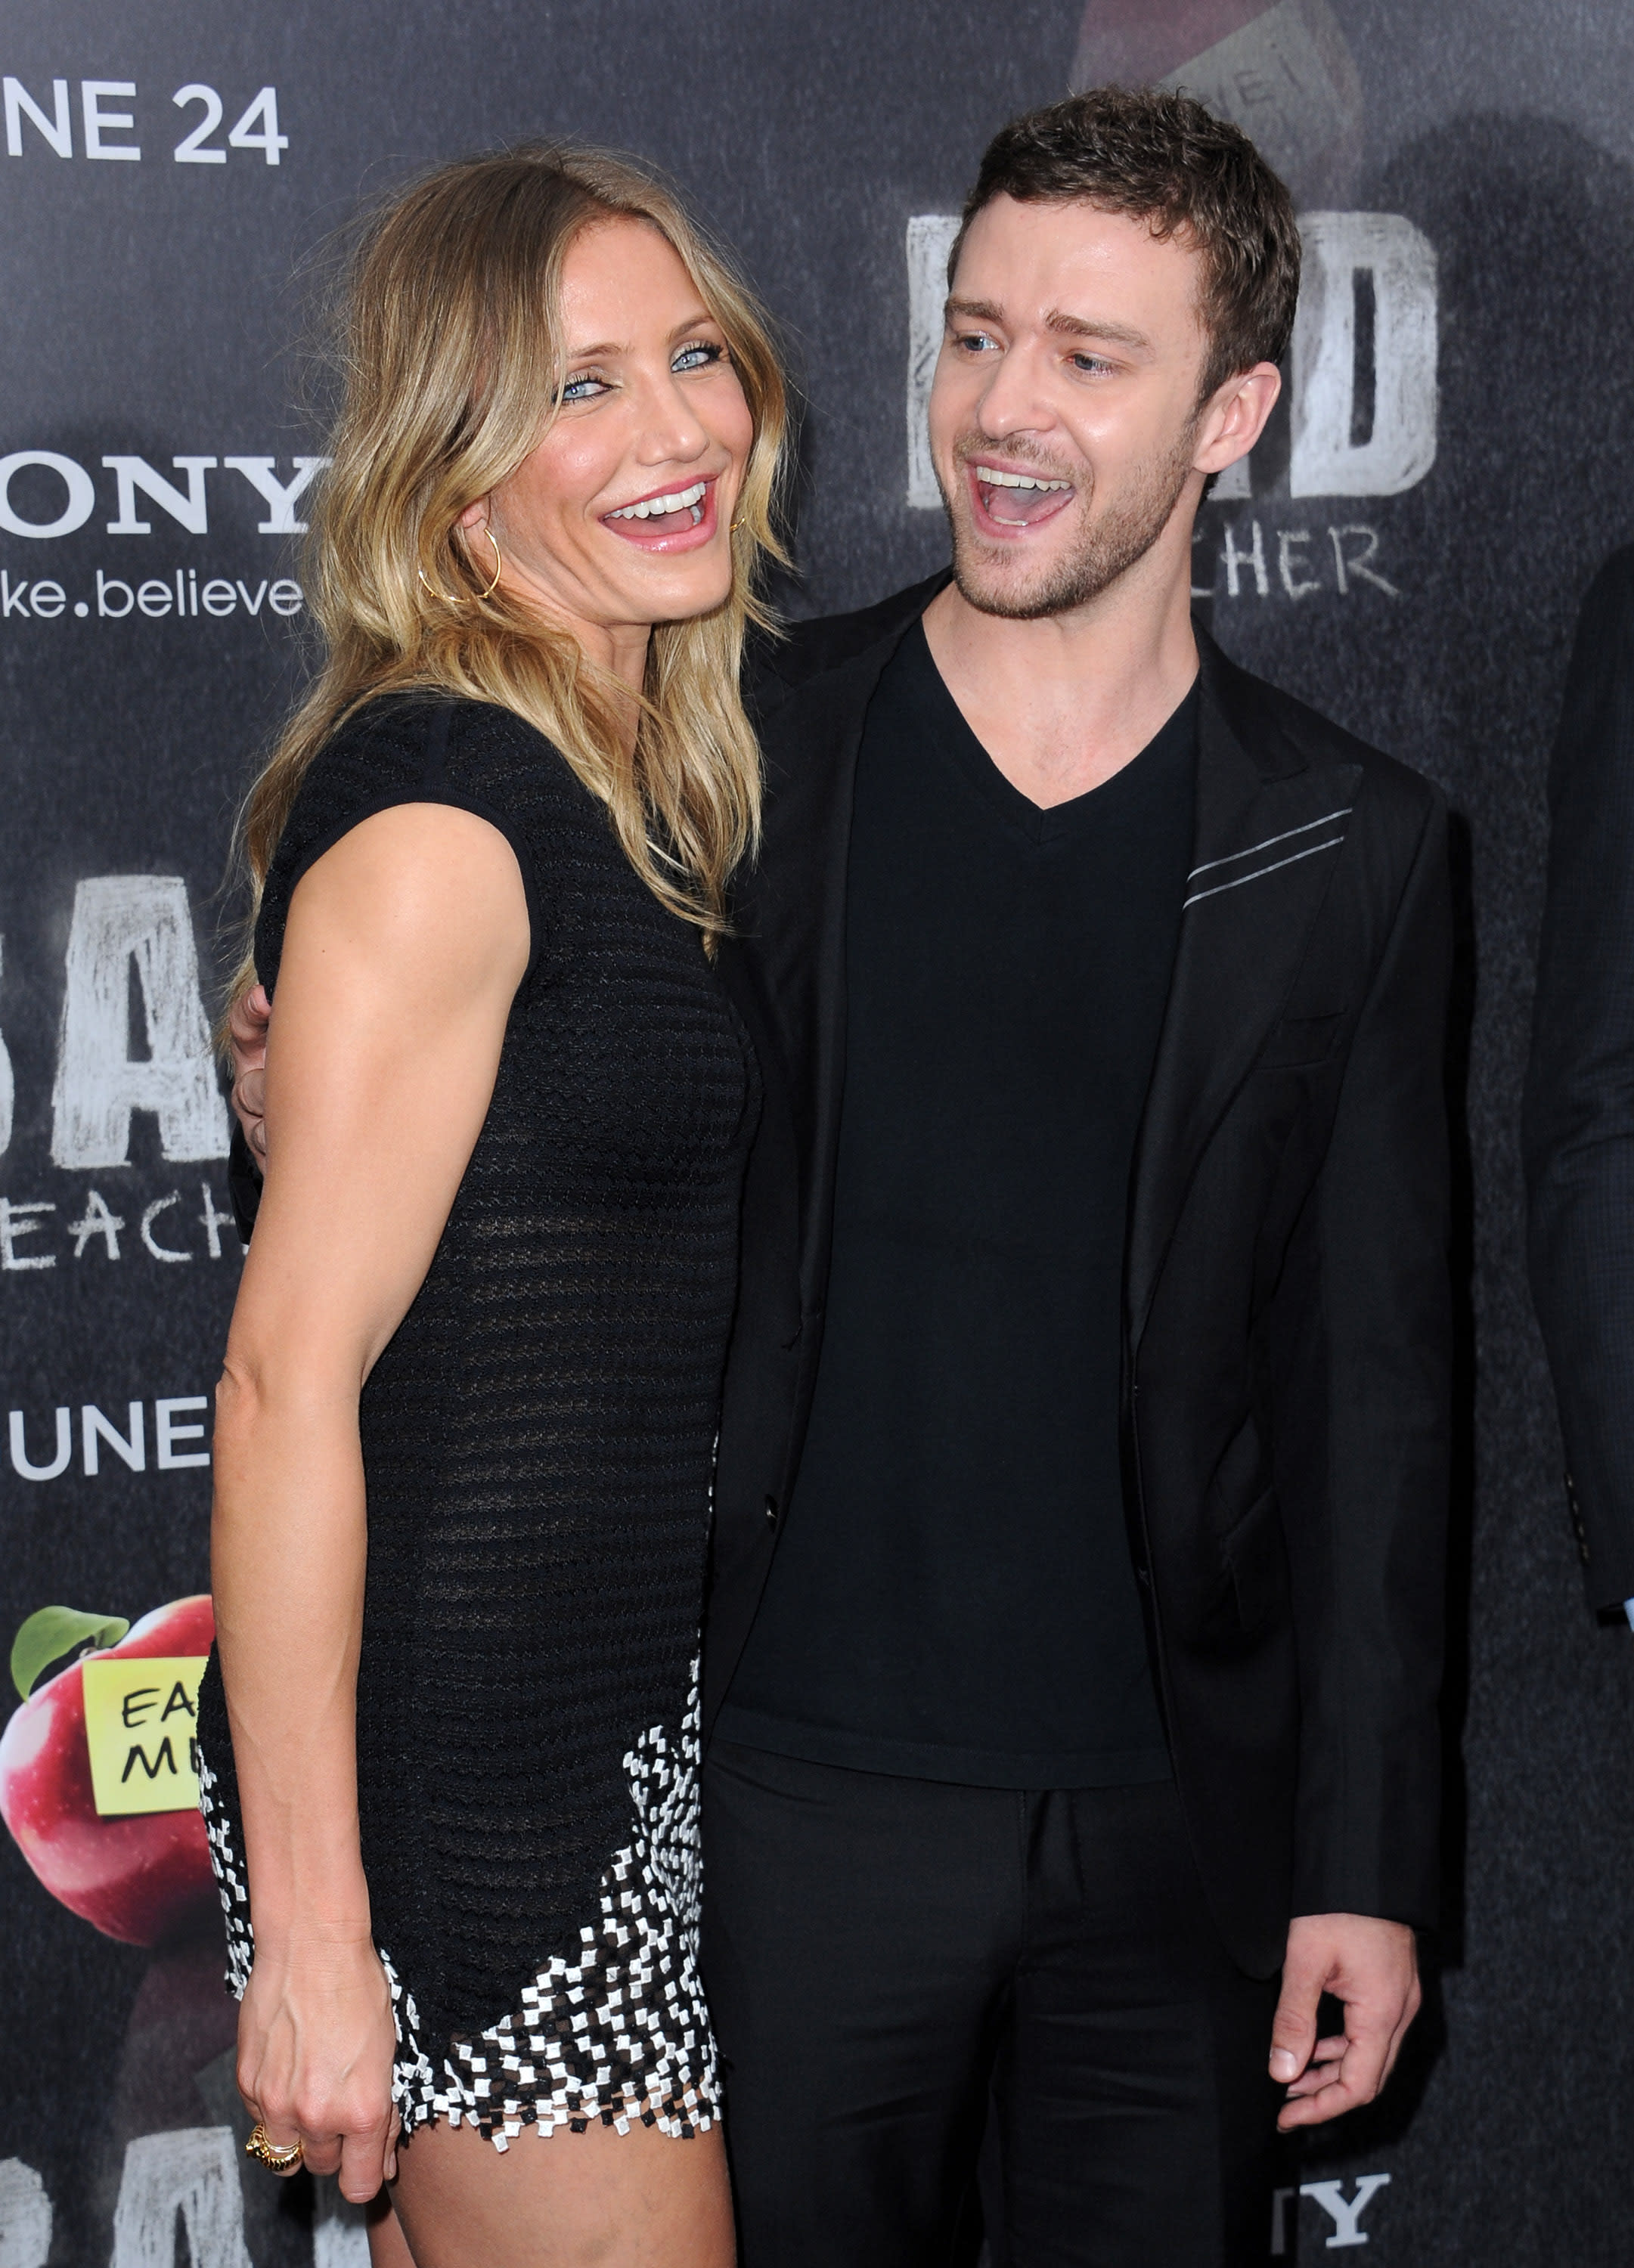 Cameron Diaz And Justin Timberlake Happy Together At The Bad Teacher